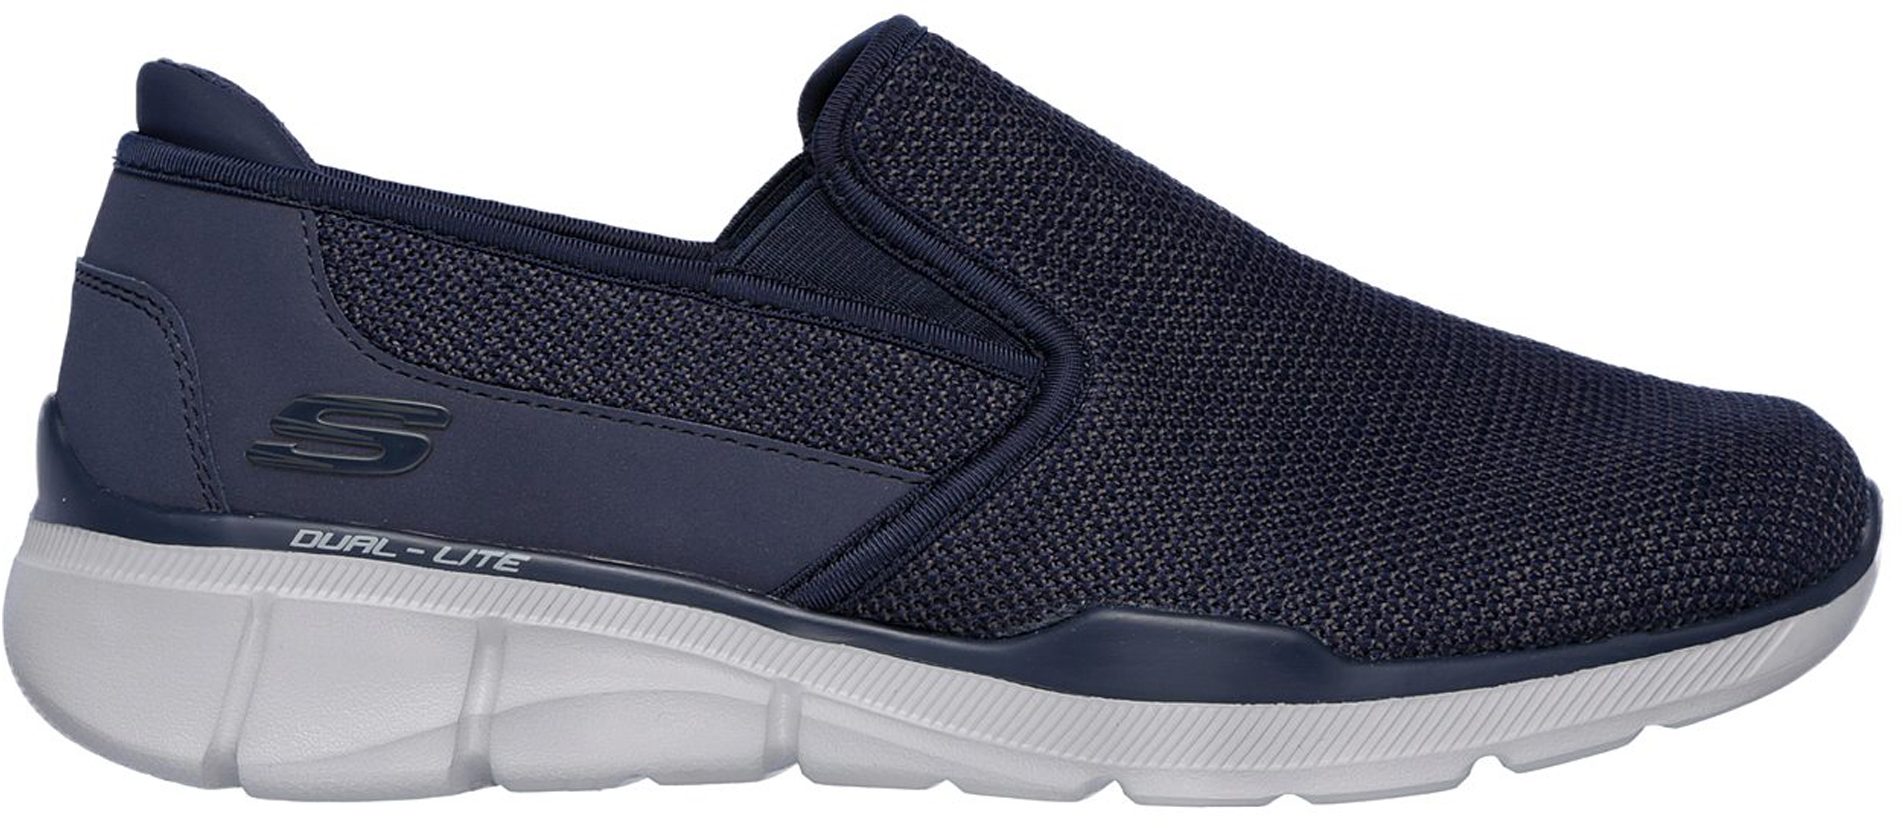 Skechers Equalizer 3.0 - Sumnin Navy 52937 NVY - Casual Shoes ...